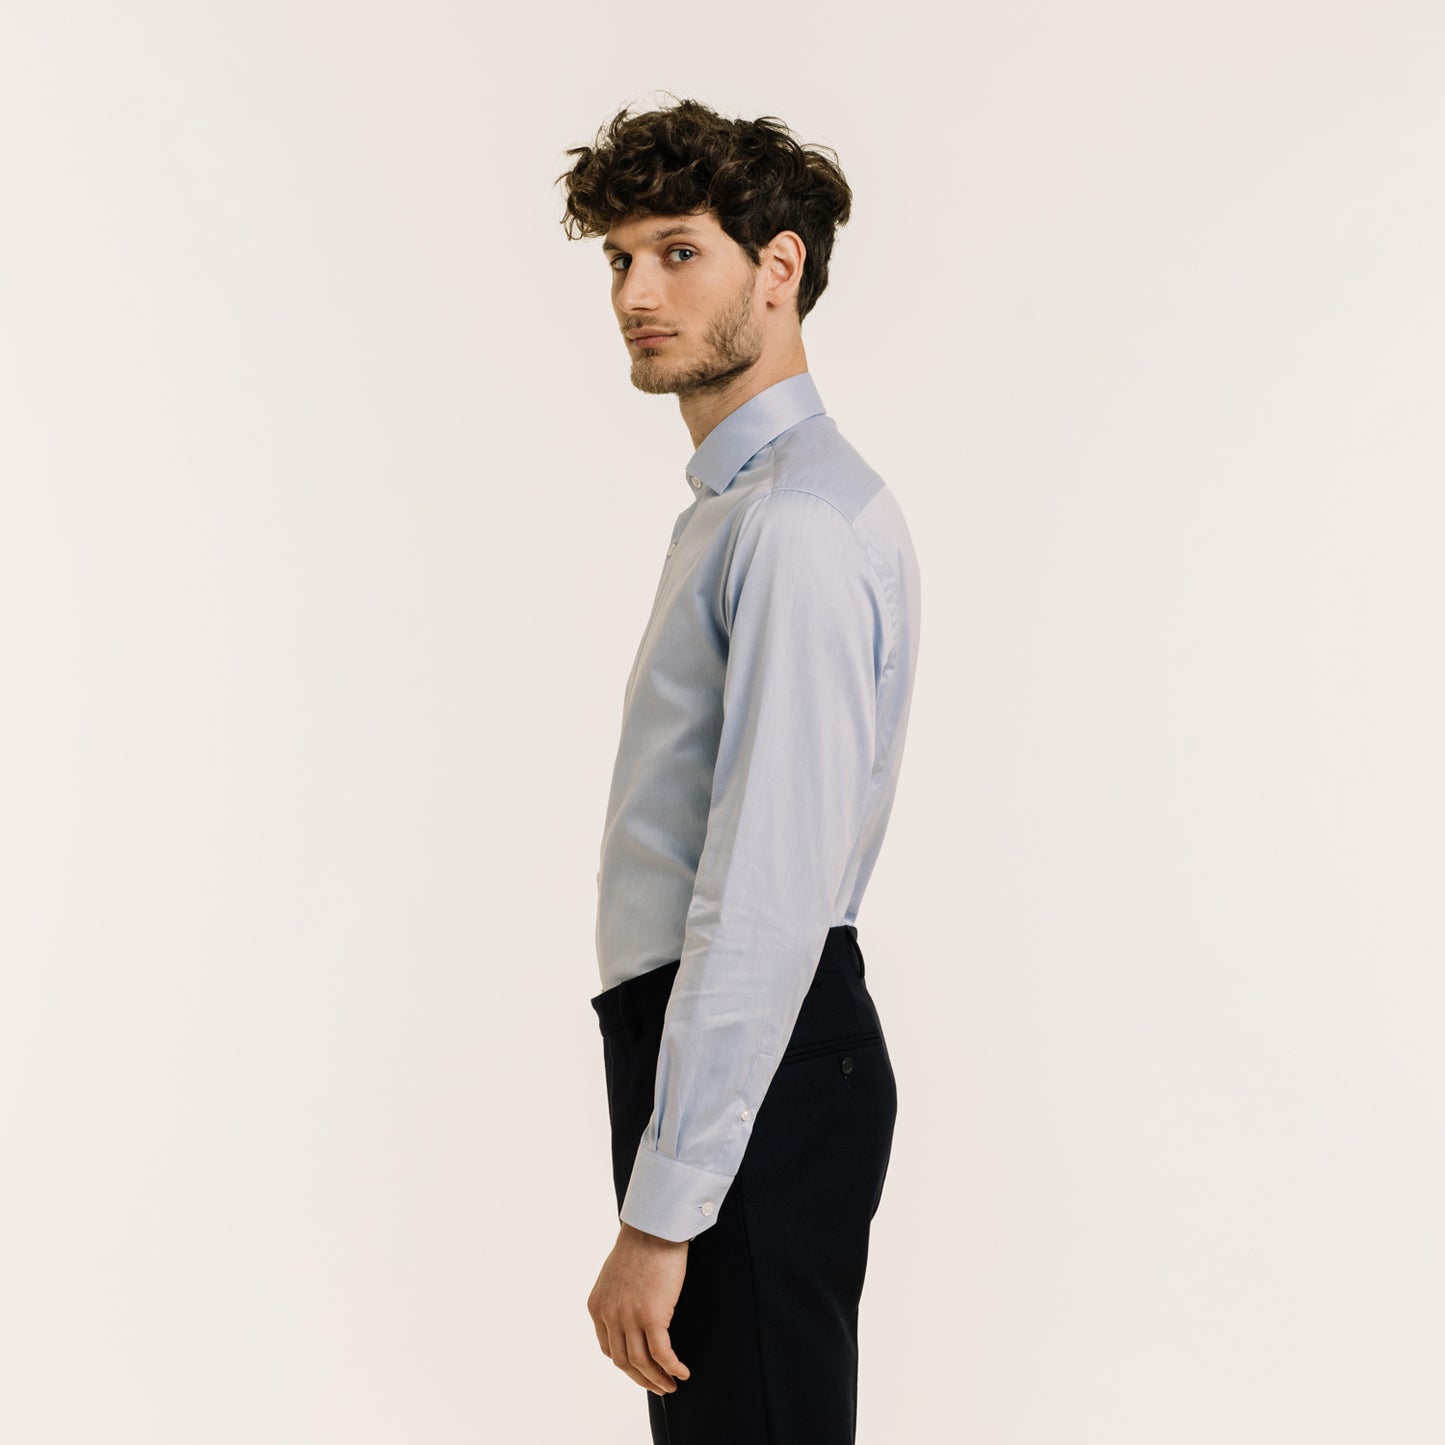 Fitted shirt in blue double-twisted twill